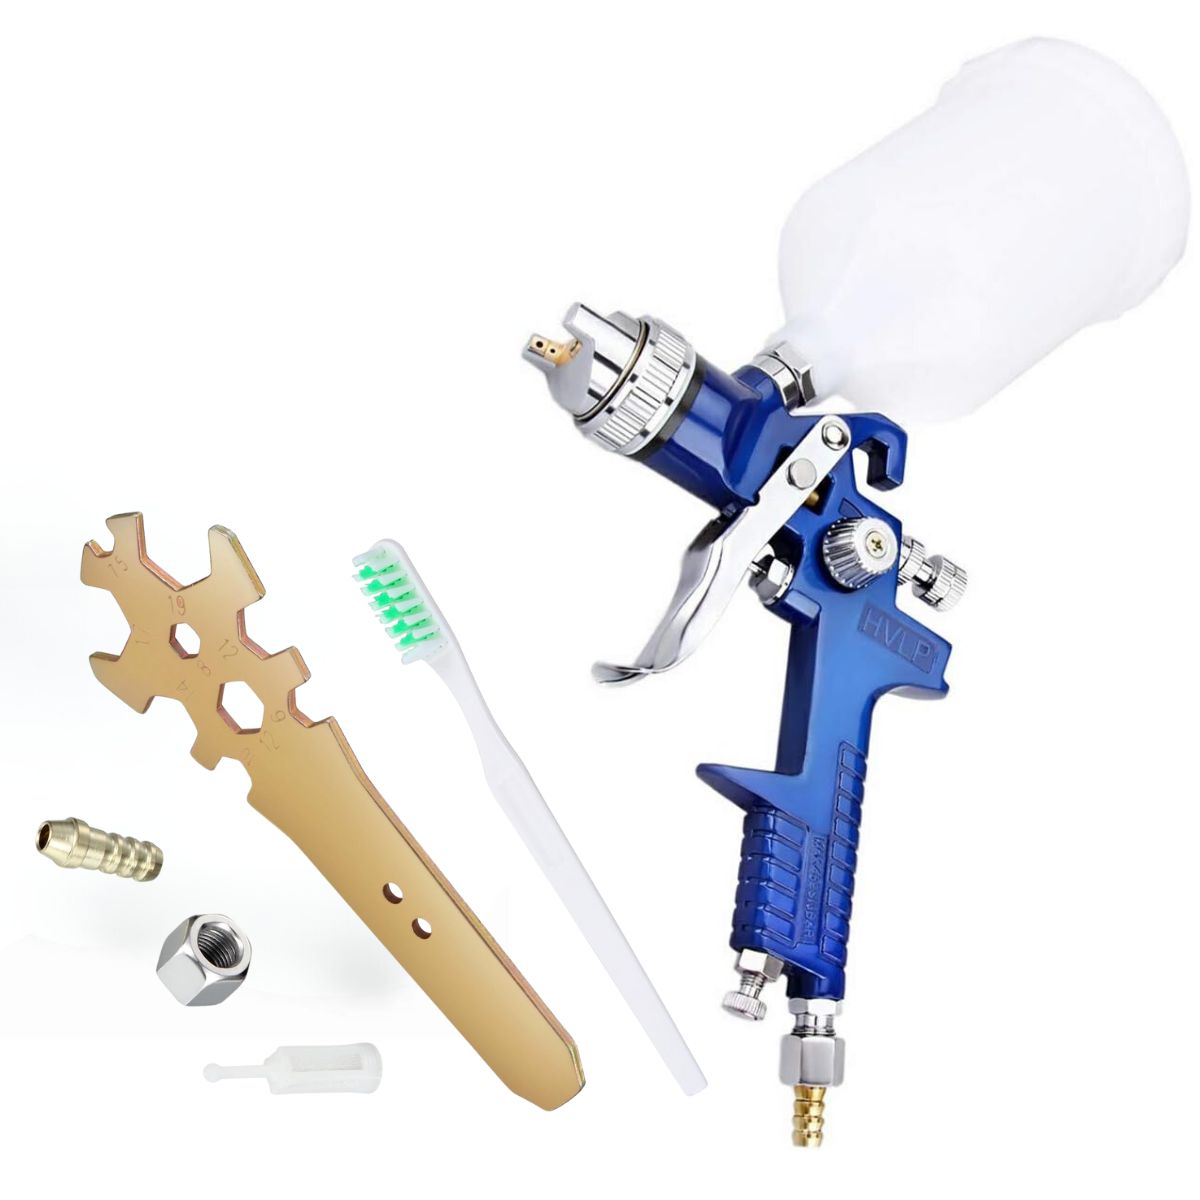 H-827 HVLP Gravity Feed Spray Paint Gun 1.7MM Nozzle Auto Body 600cc Plastic Cup - South East Clearance Centre